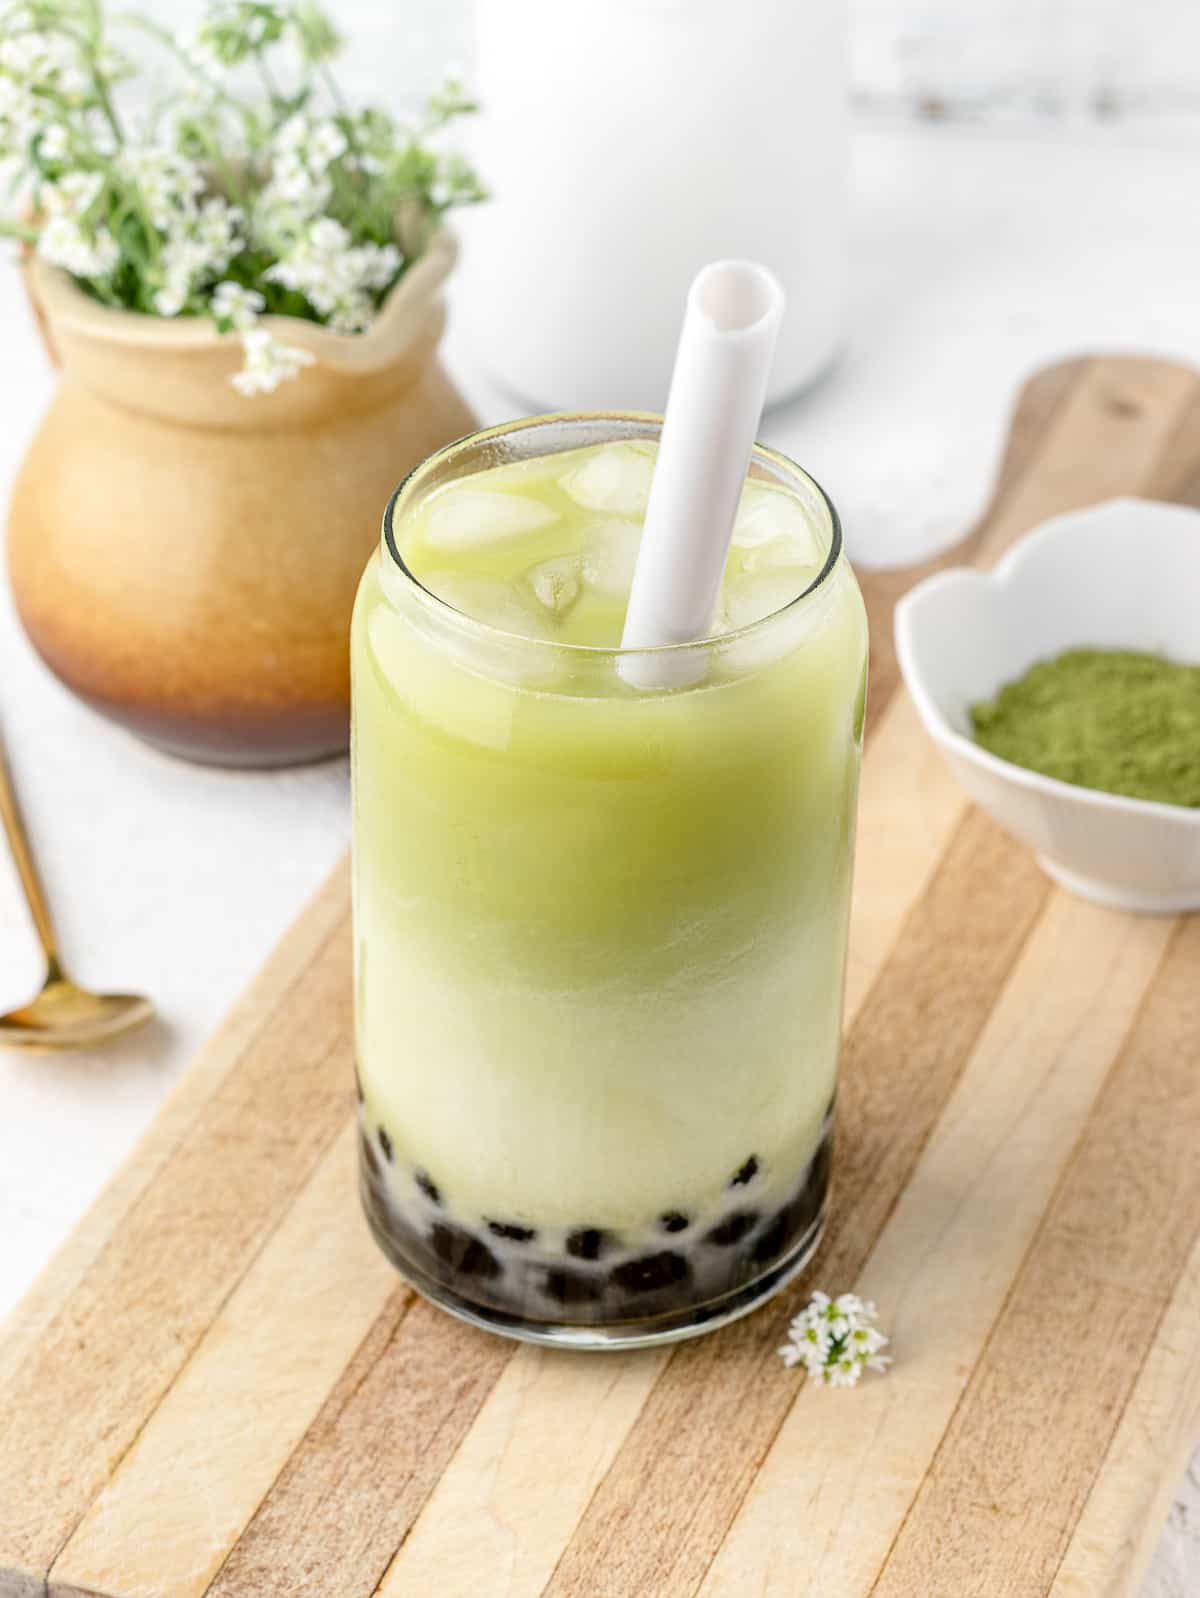 Layers of boba, matcha tea, and half and half in a glass.